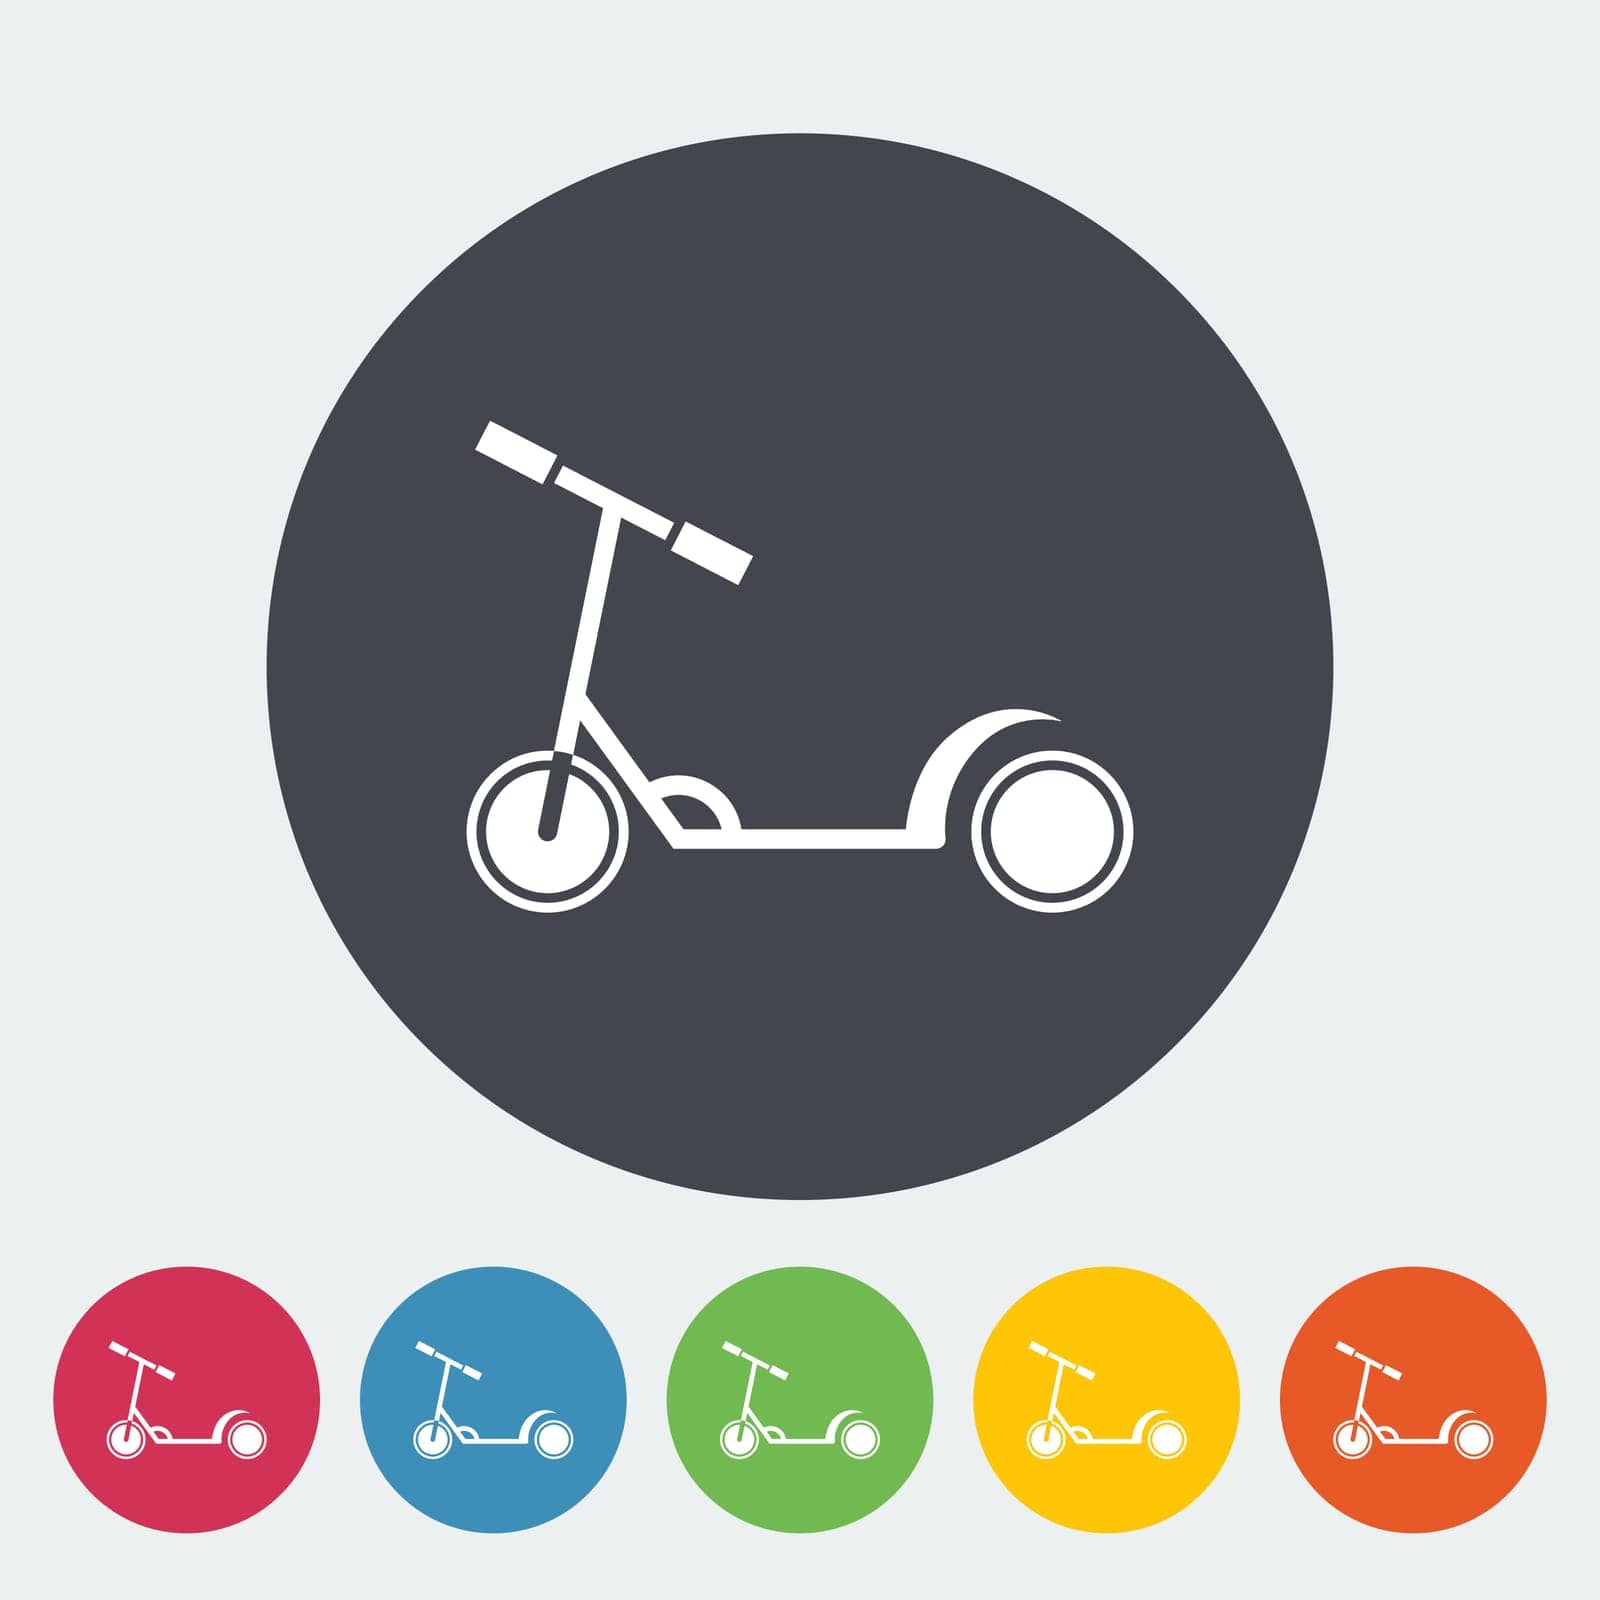 Scooter child icon. Flat vector related icon for web and mobile applications. It can be used as - logo, pictogram, icon, infographic element. Vector Illustration.